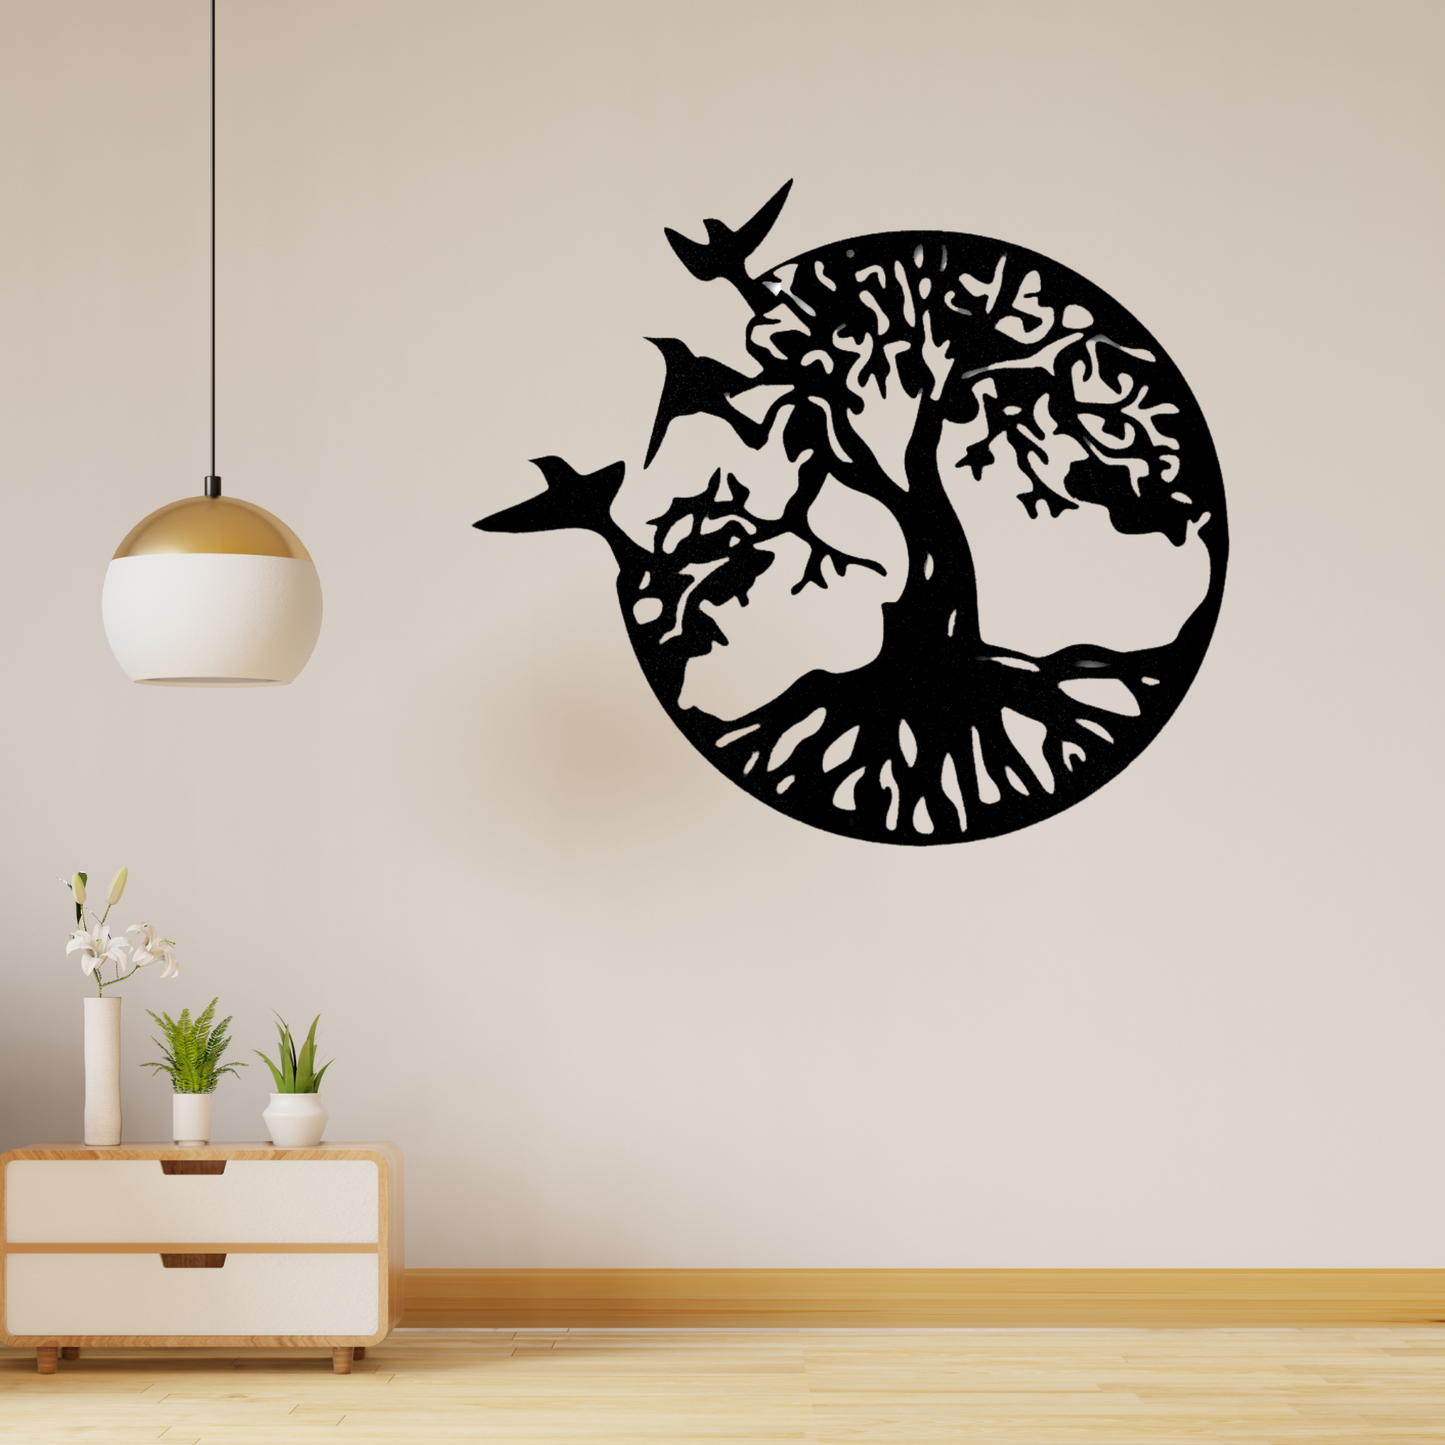 Take Flight Tree - Steel Sign, Personalized Metal Wall Decor, Family Name Sign, Metal Signs, Metal Decorative Sign, Monogram Wall Art